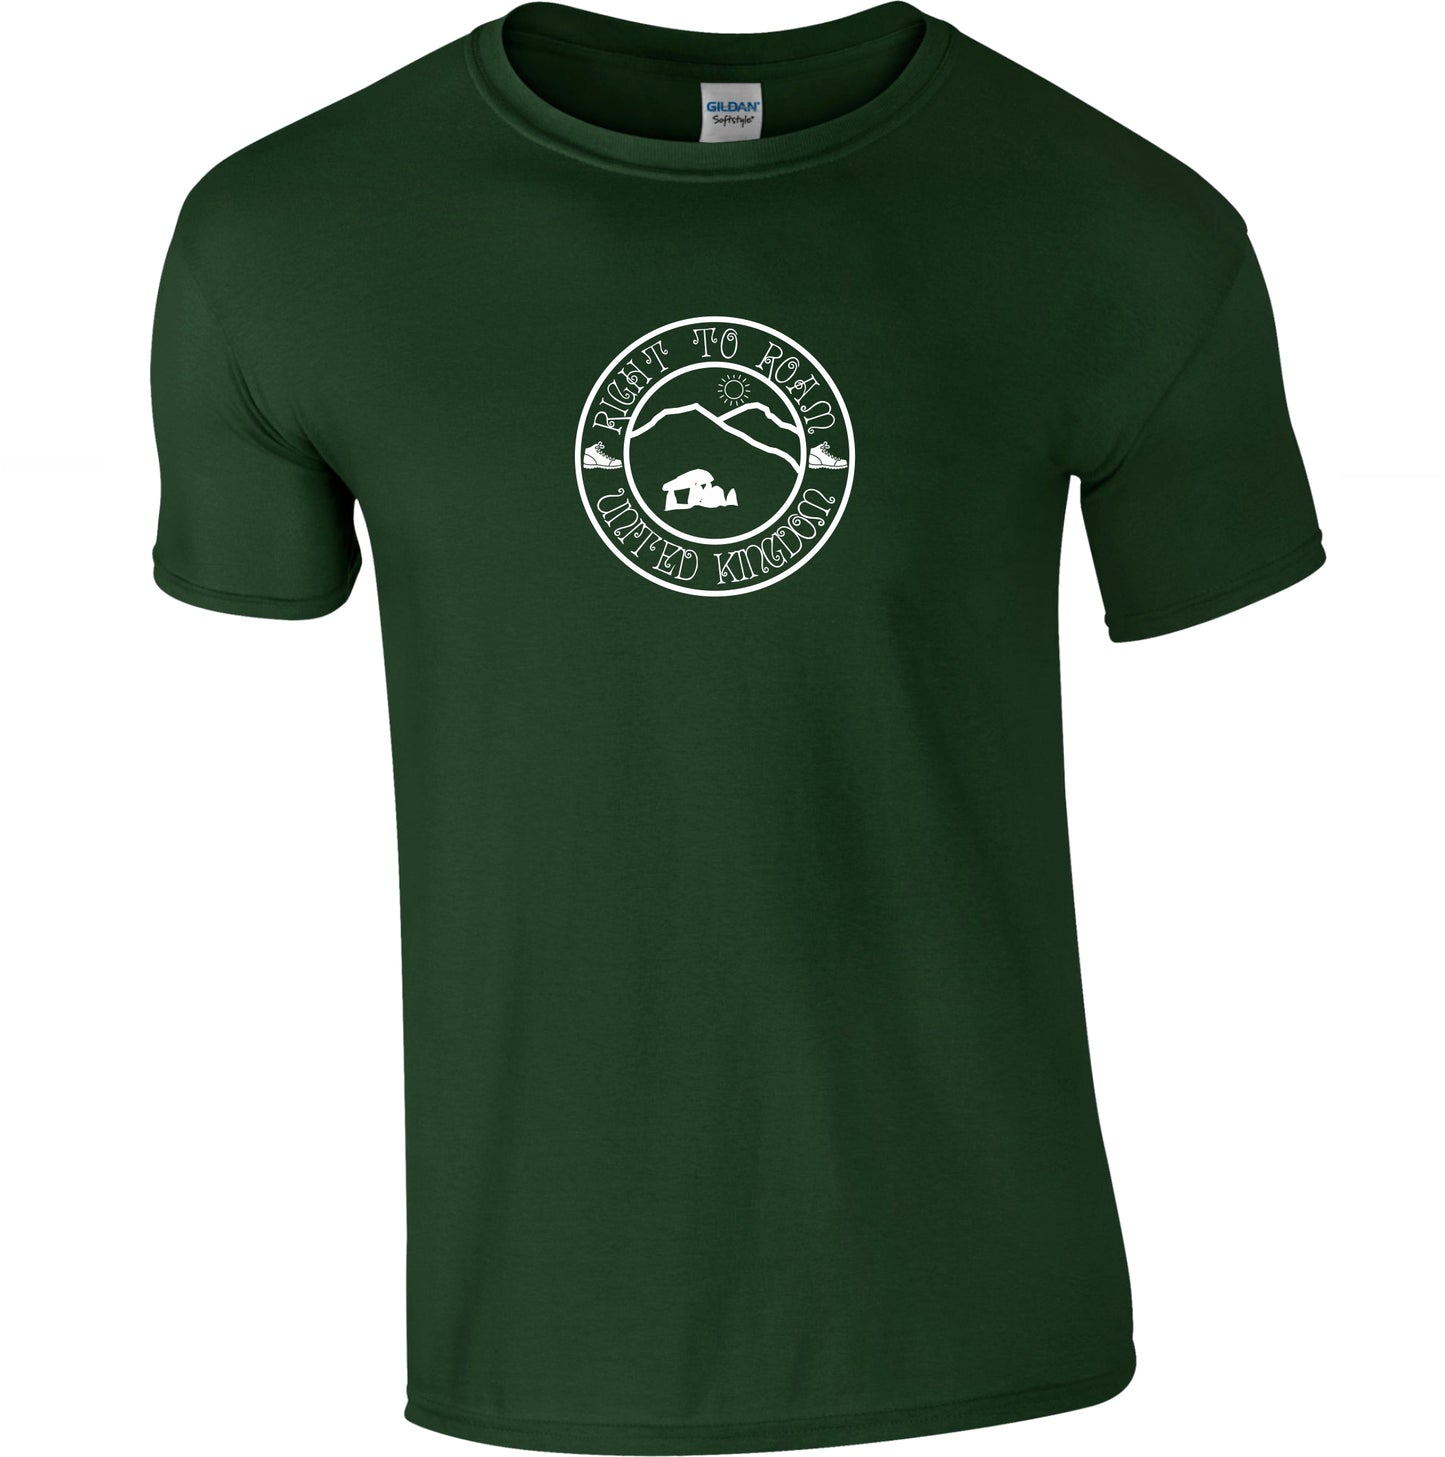 Right To Roam T-Shirt - Hiking, Protest, Trail, Various Colours